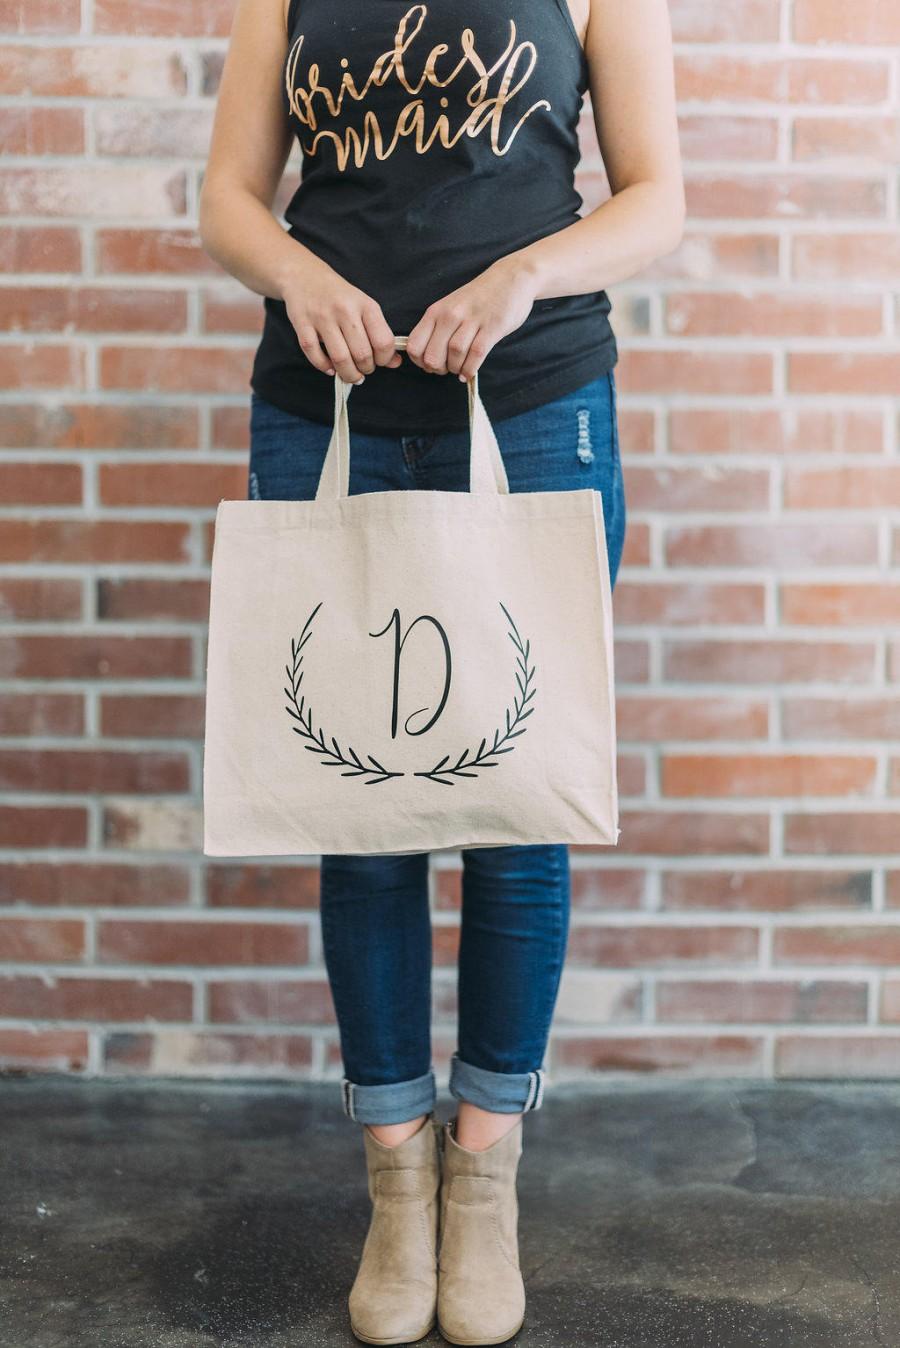 Mariage - Custom Tote, Personalized Tote, Bridesmaid Tote Bag, Bridal Party Totes, Bridesmaid Tote Bag, Initial Tote, Bridal Tote, Bridesmaid Bag